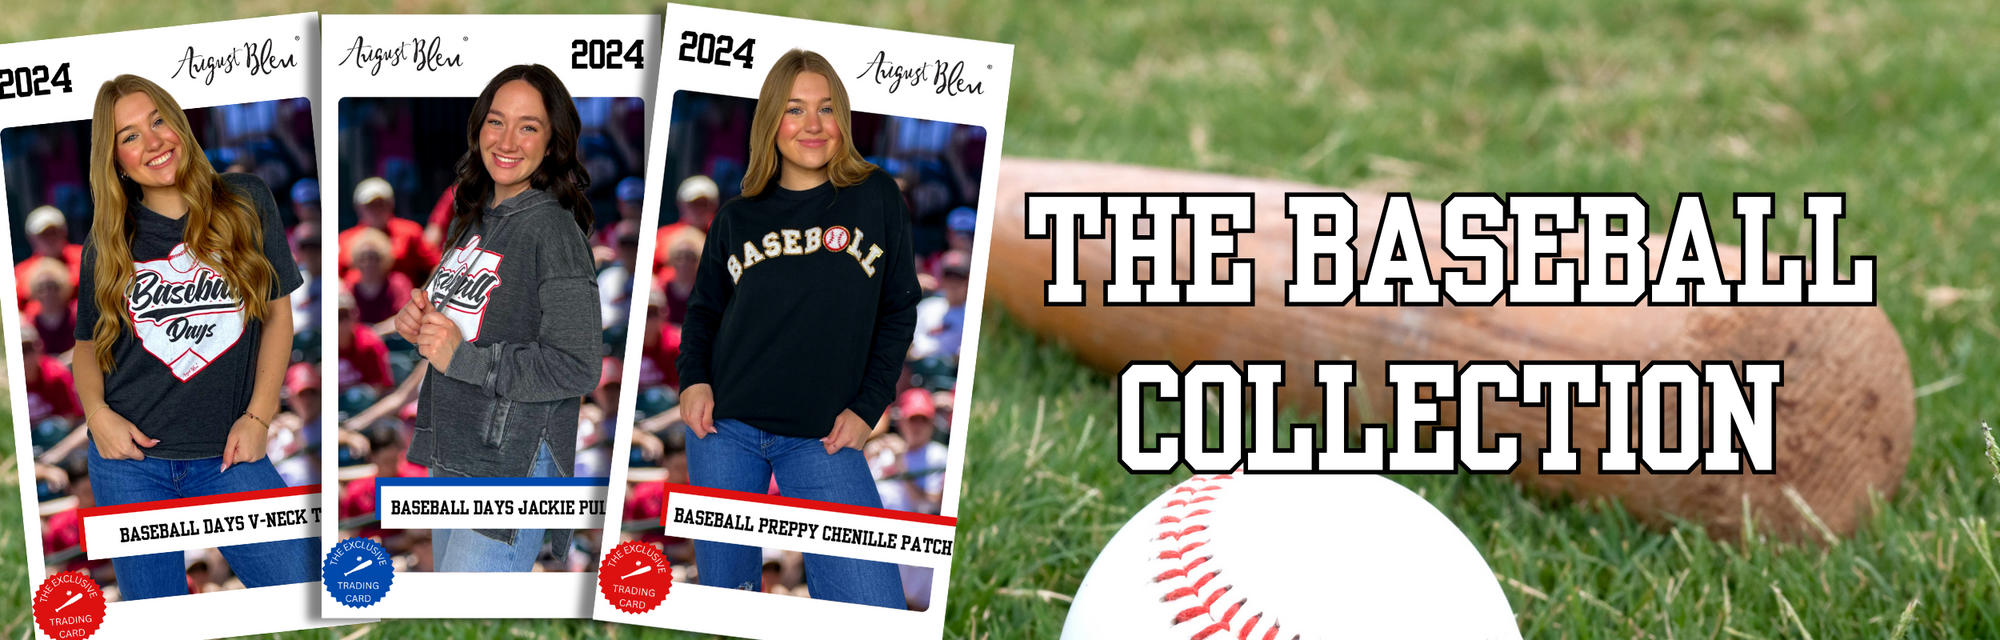 The Baseball Collection Website Banner